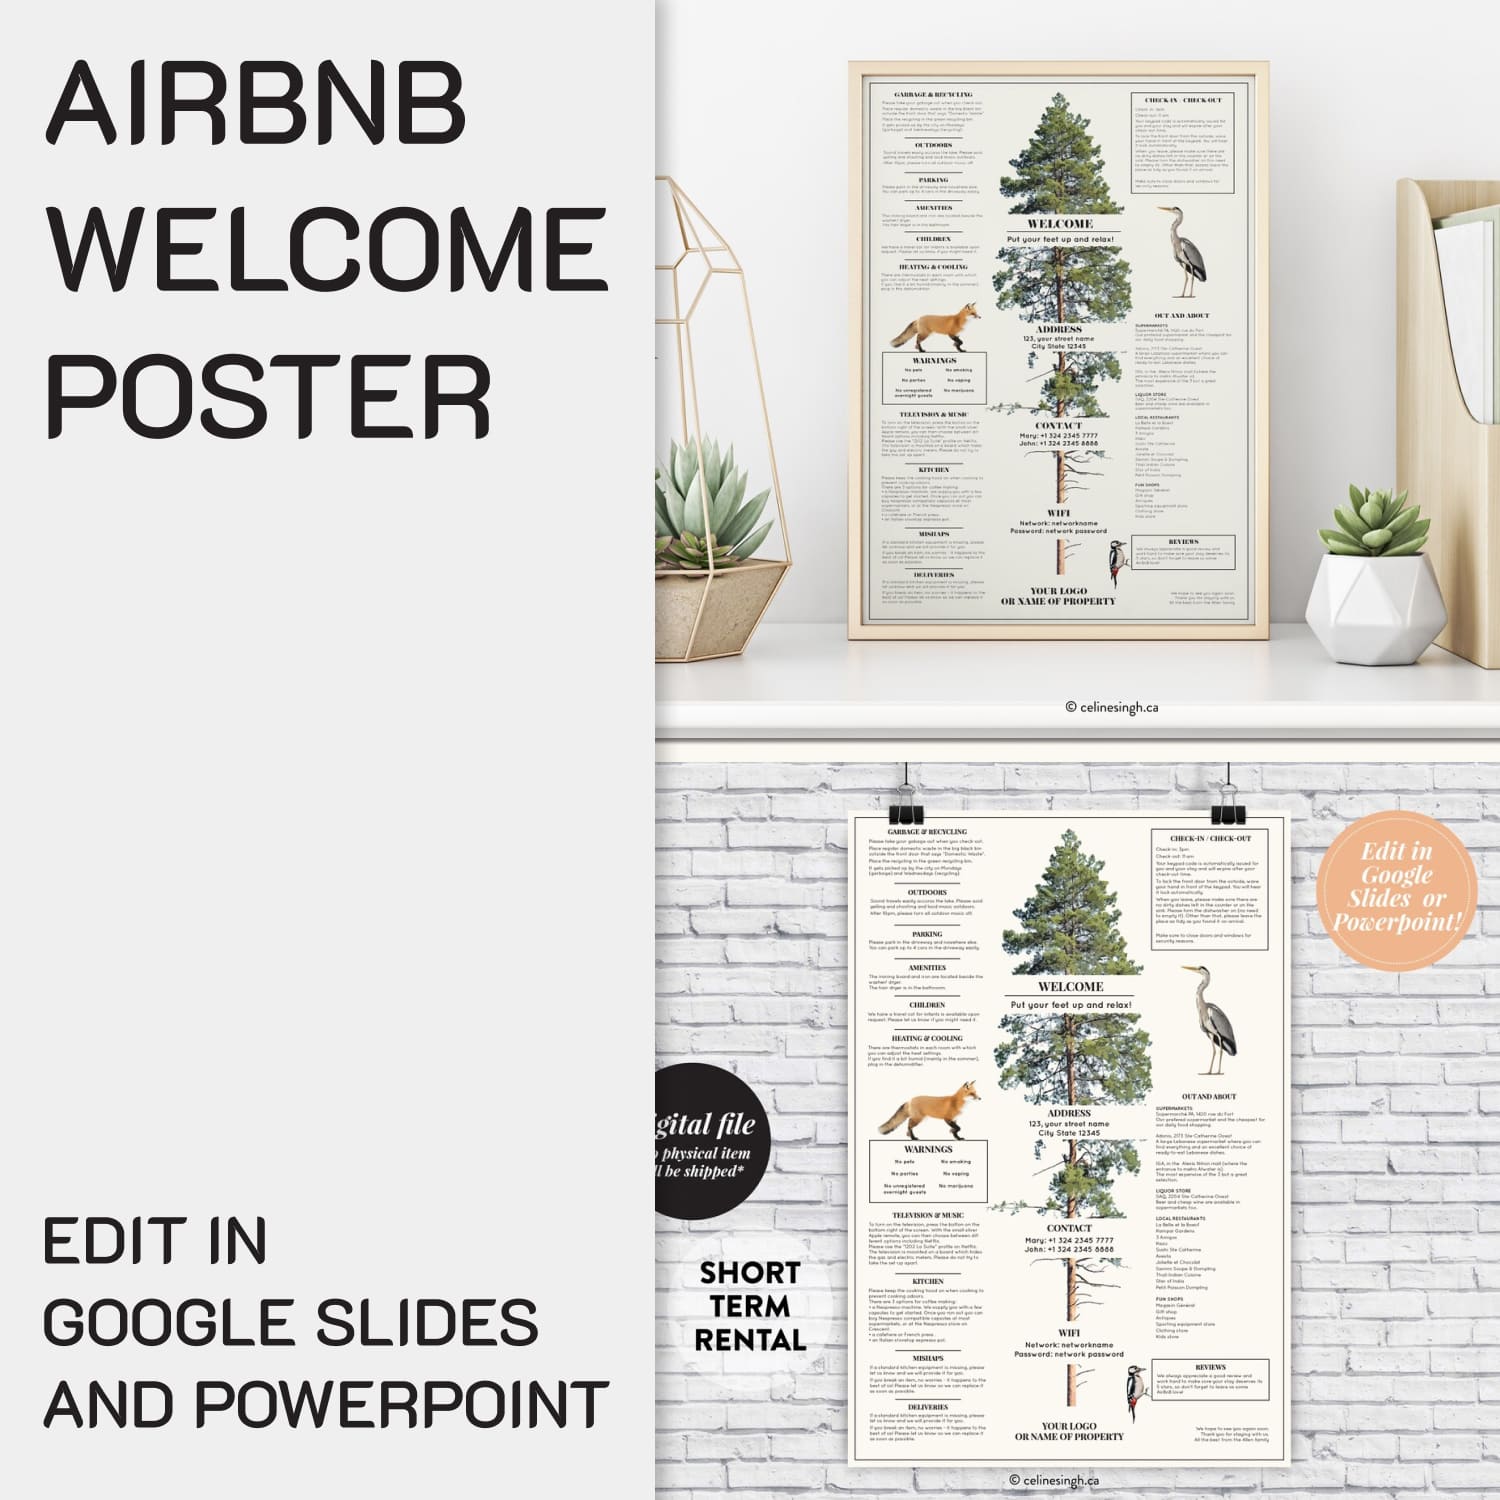 Editable Airbnb Welcome Poster* Edit In Google Slides And Powerpoint * Vrbo Short Term Rental * Lake Pine Tree * Cottage Rental Art.